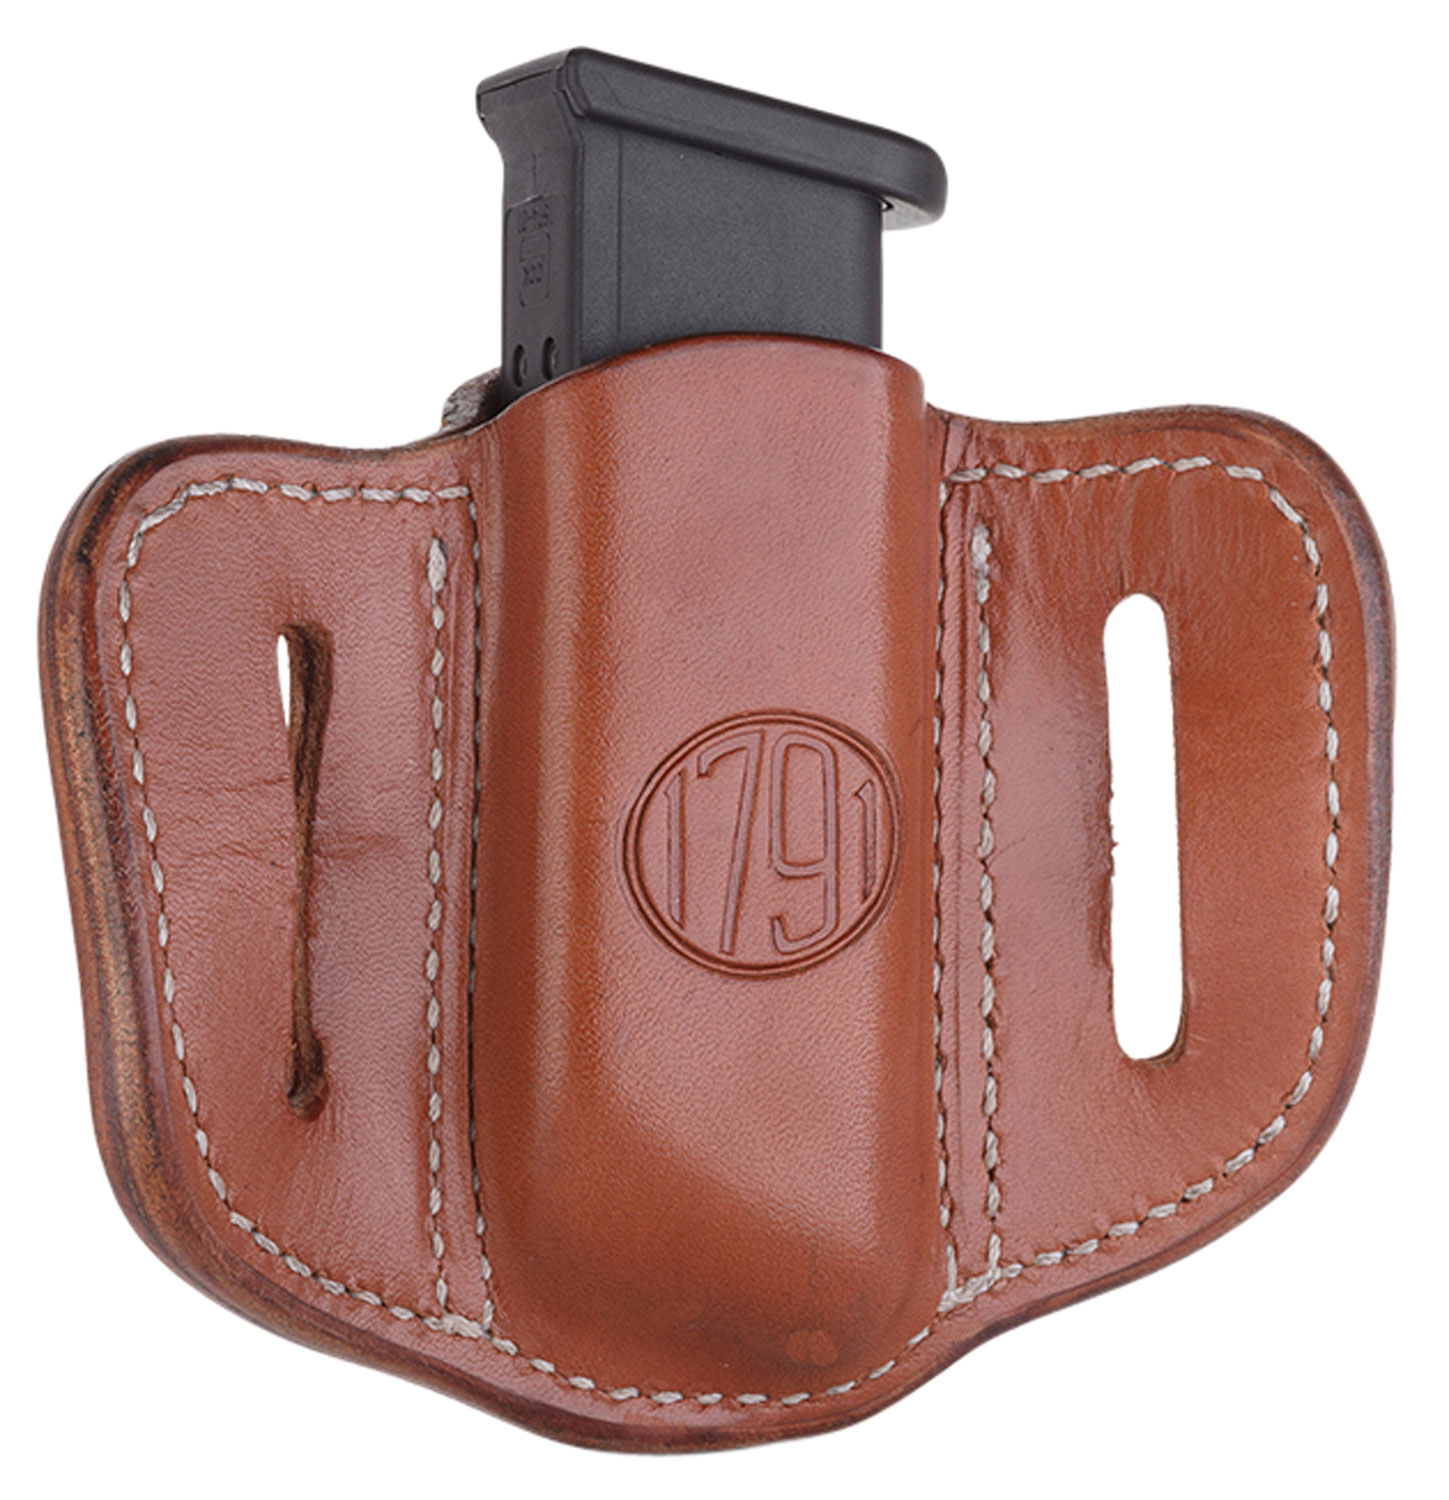 1791 Gunleather MAG12CBRA MAG1.2 Single Mag Holster Classic Brown Leather Belt Slide Compatible w/ Double Stack Ambidextrous